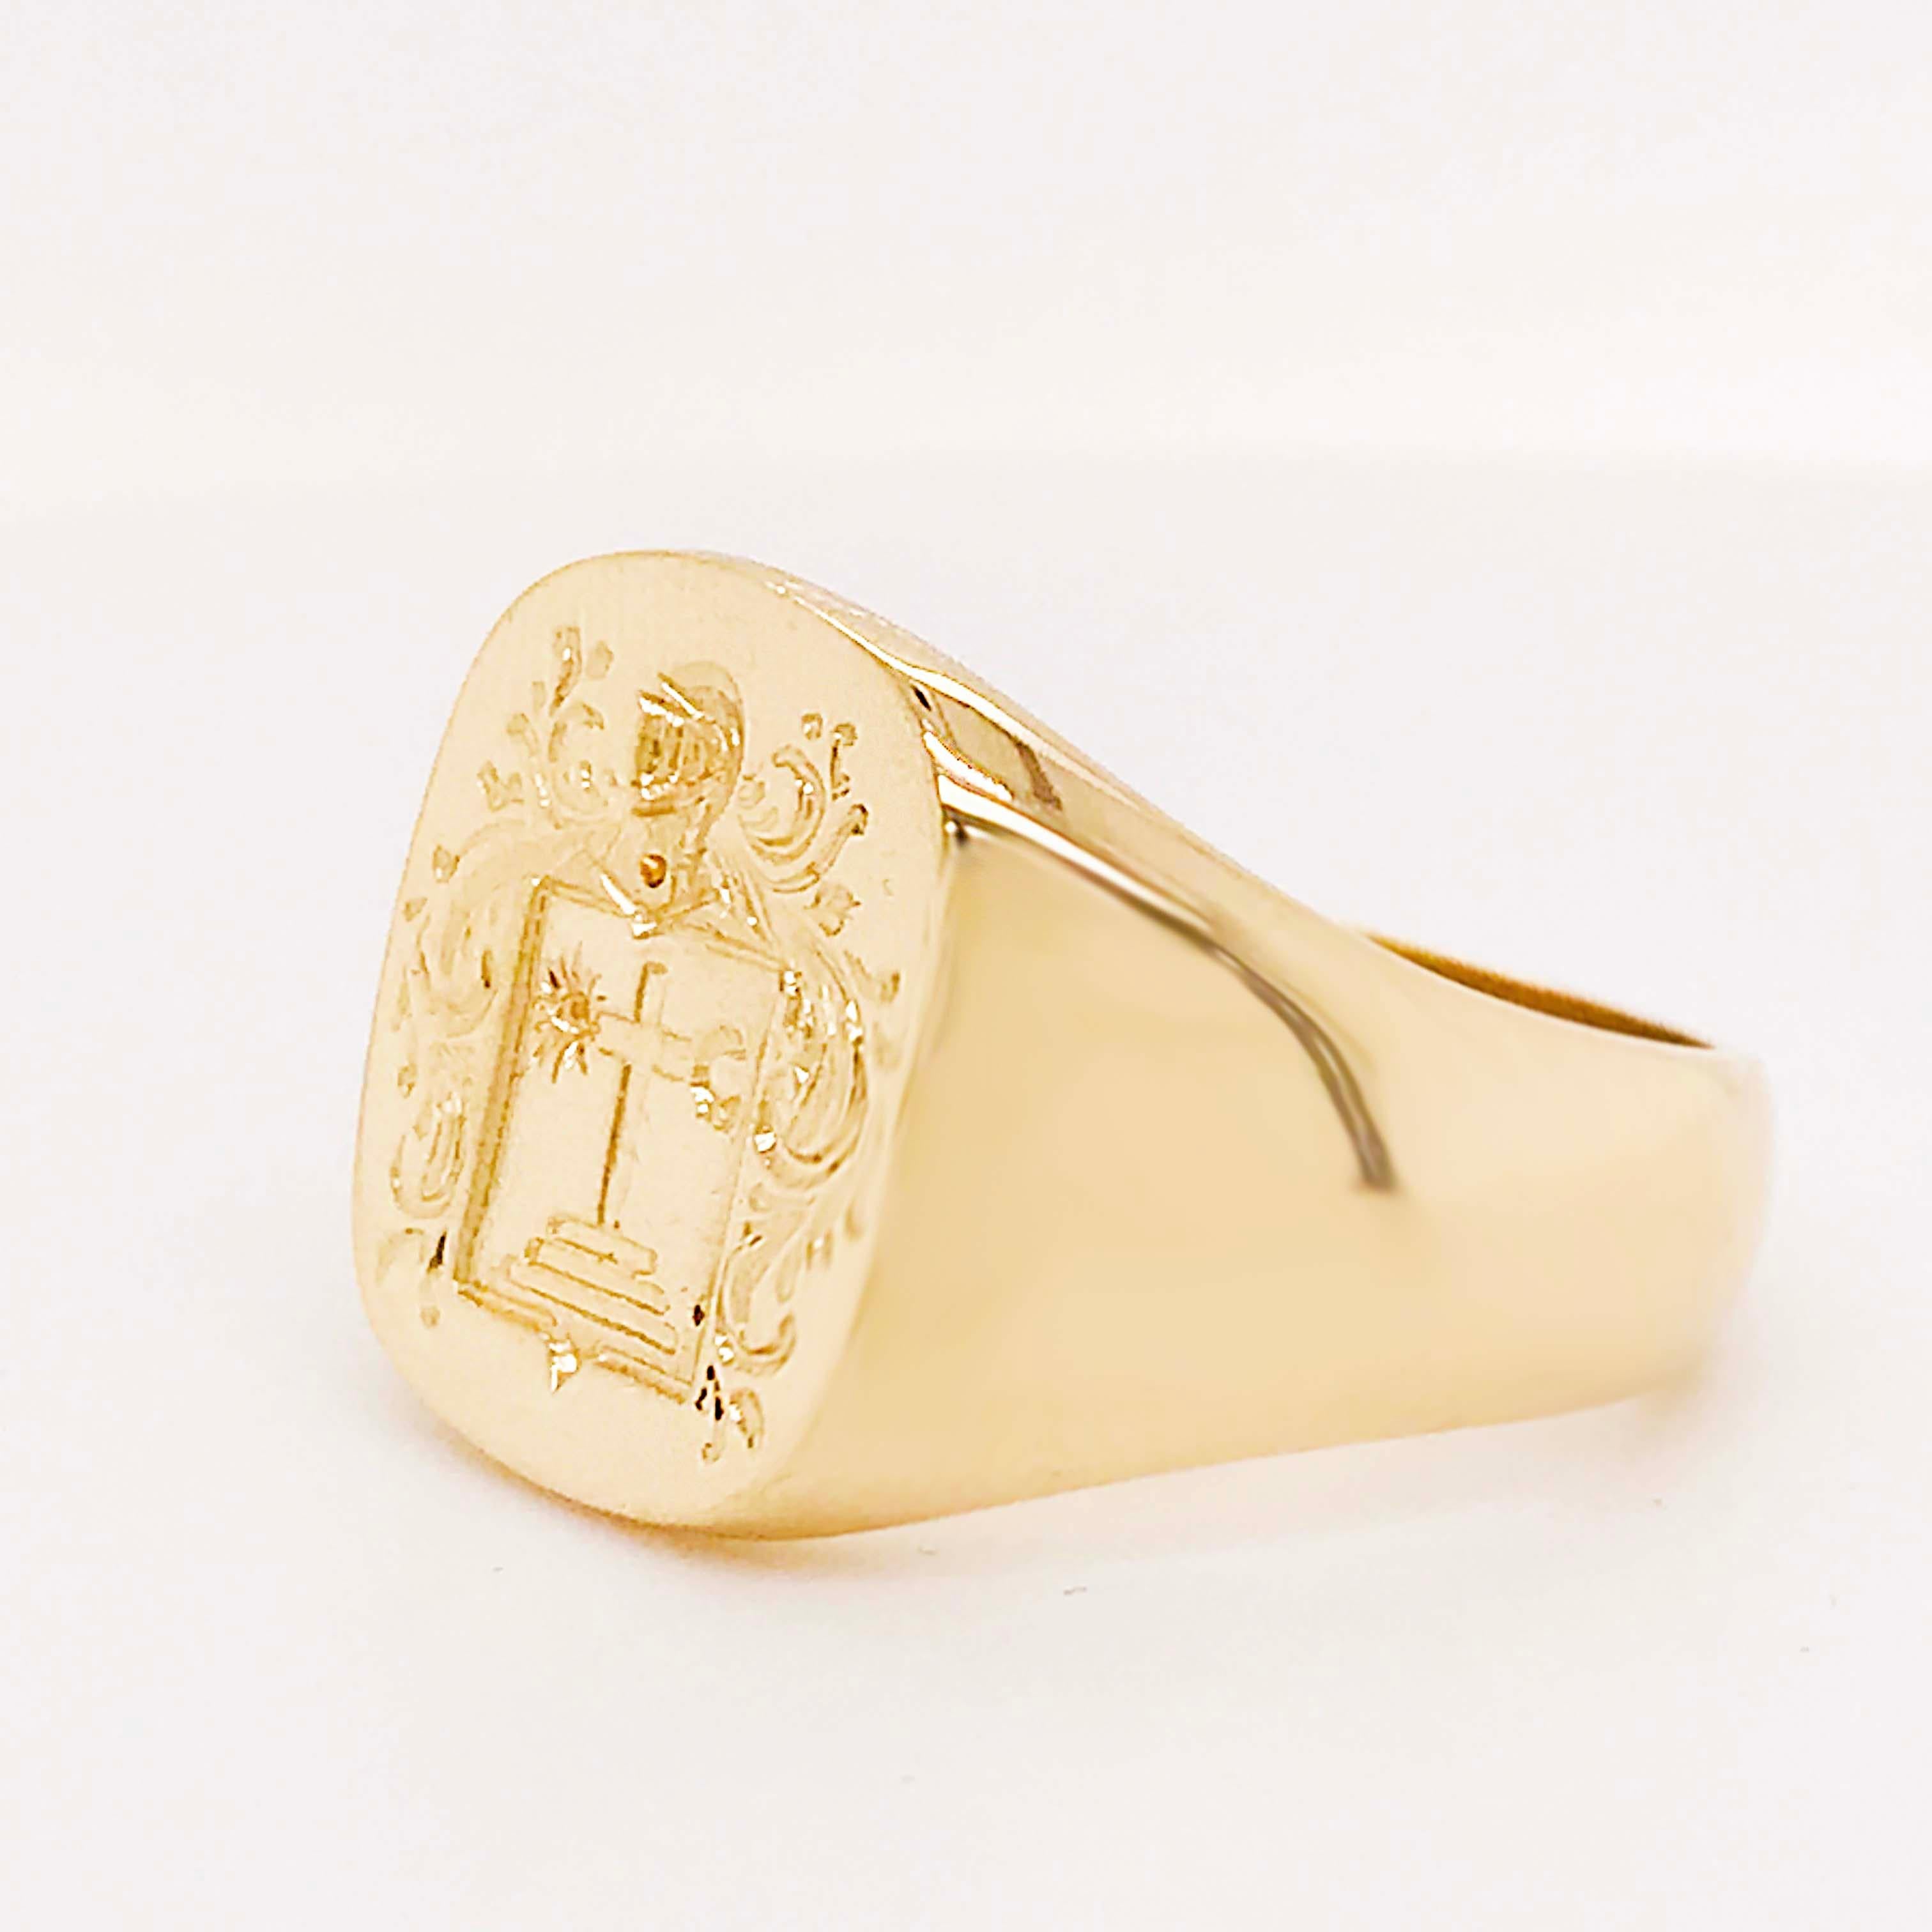 Men's Cross Signet Man's Ring in 14K Yellow Gold, Religious Coat of Arms Ring